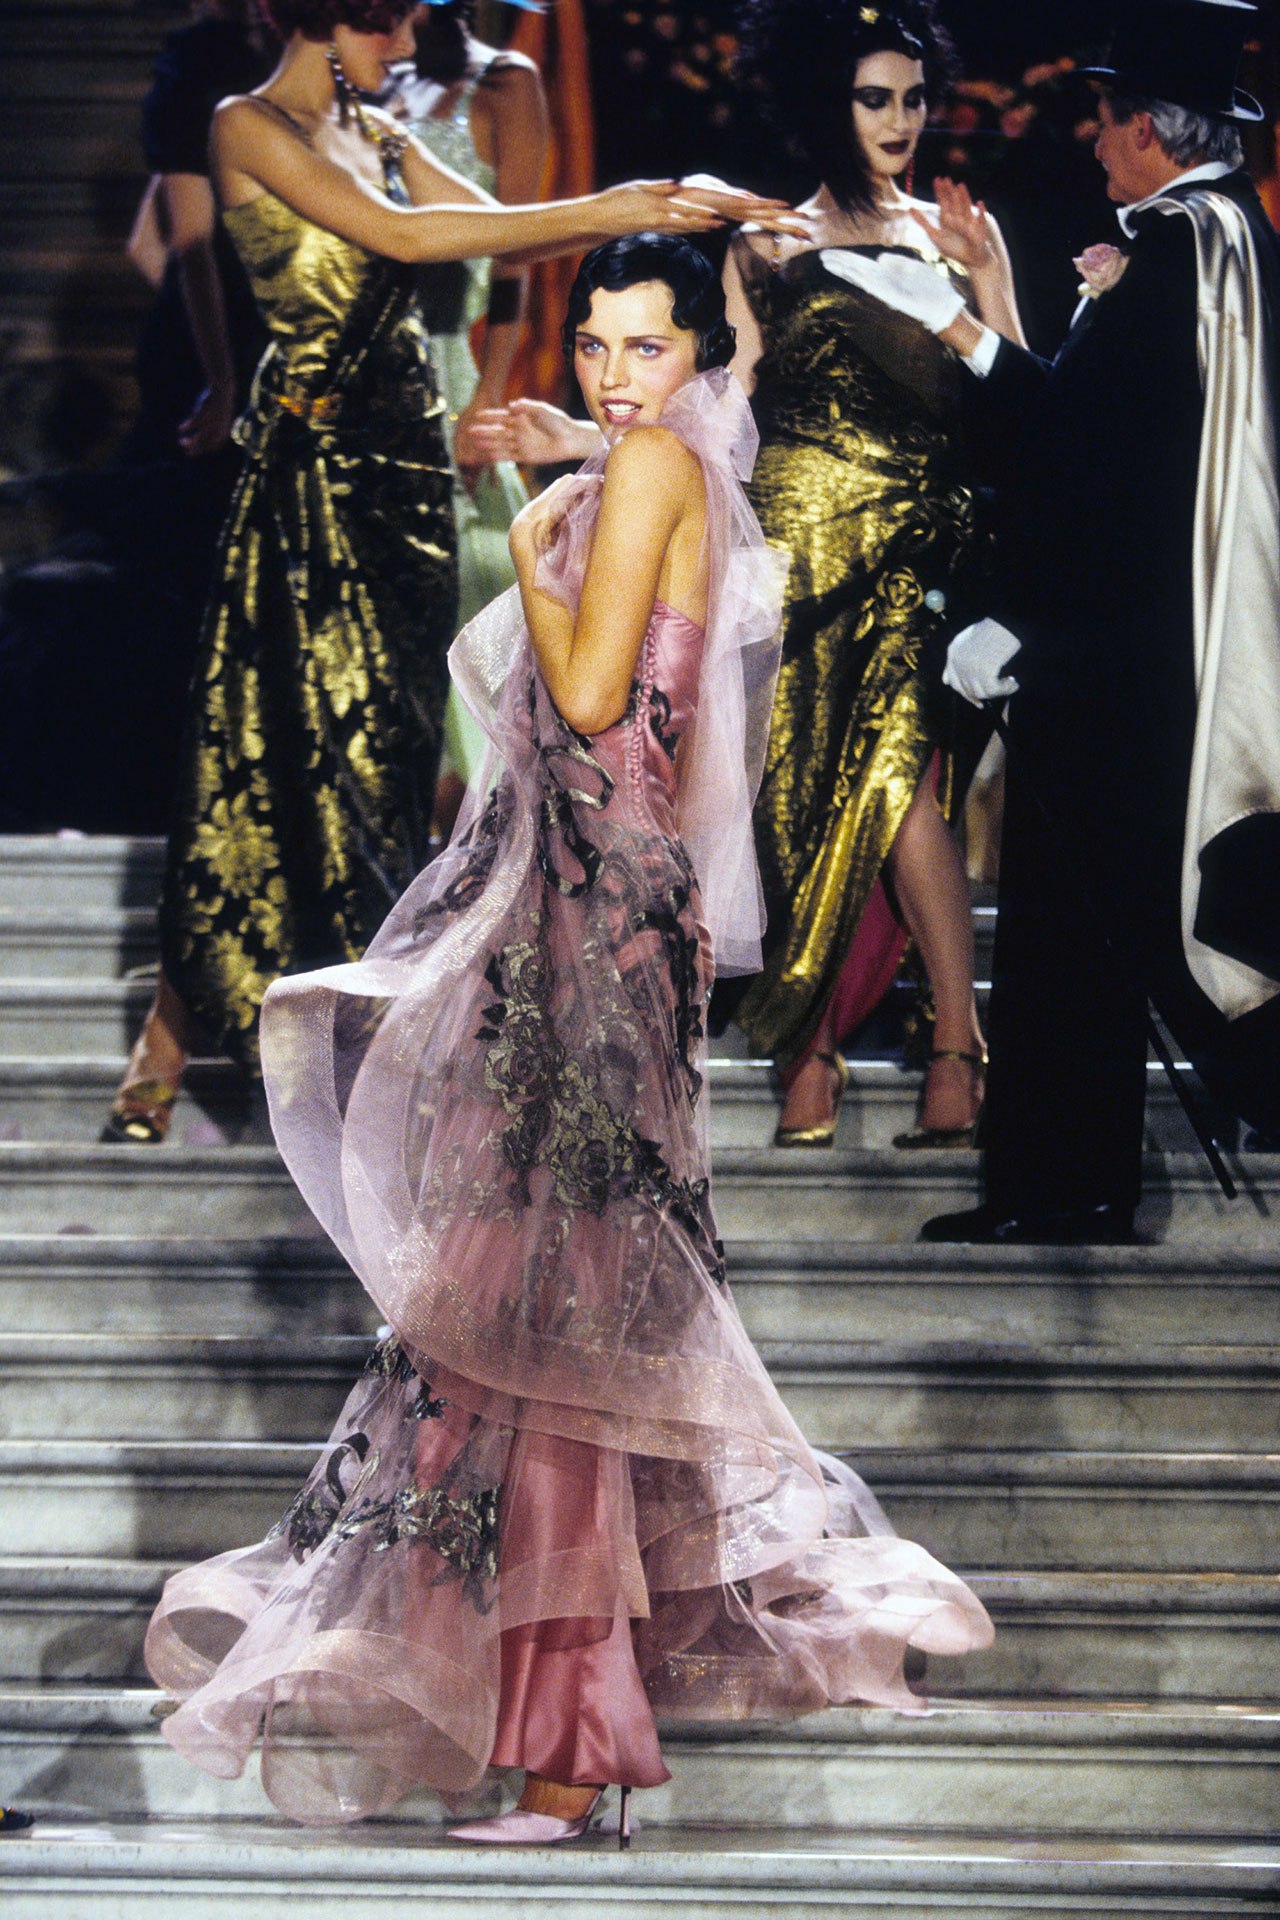 The Most Influential Runway Shows of All Time